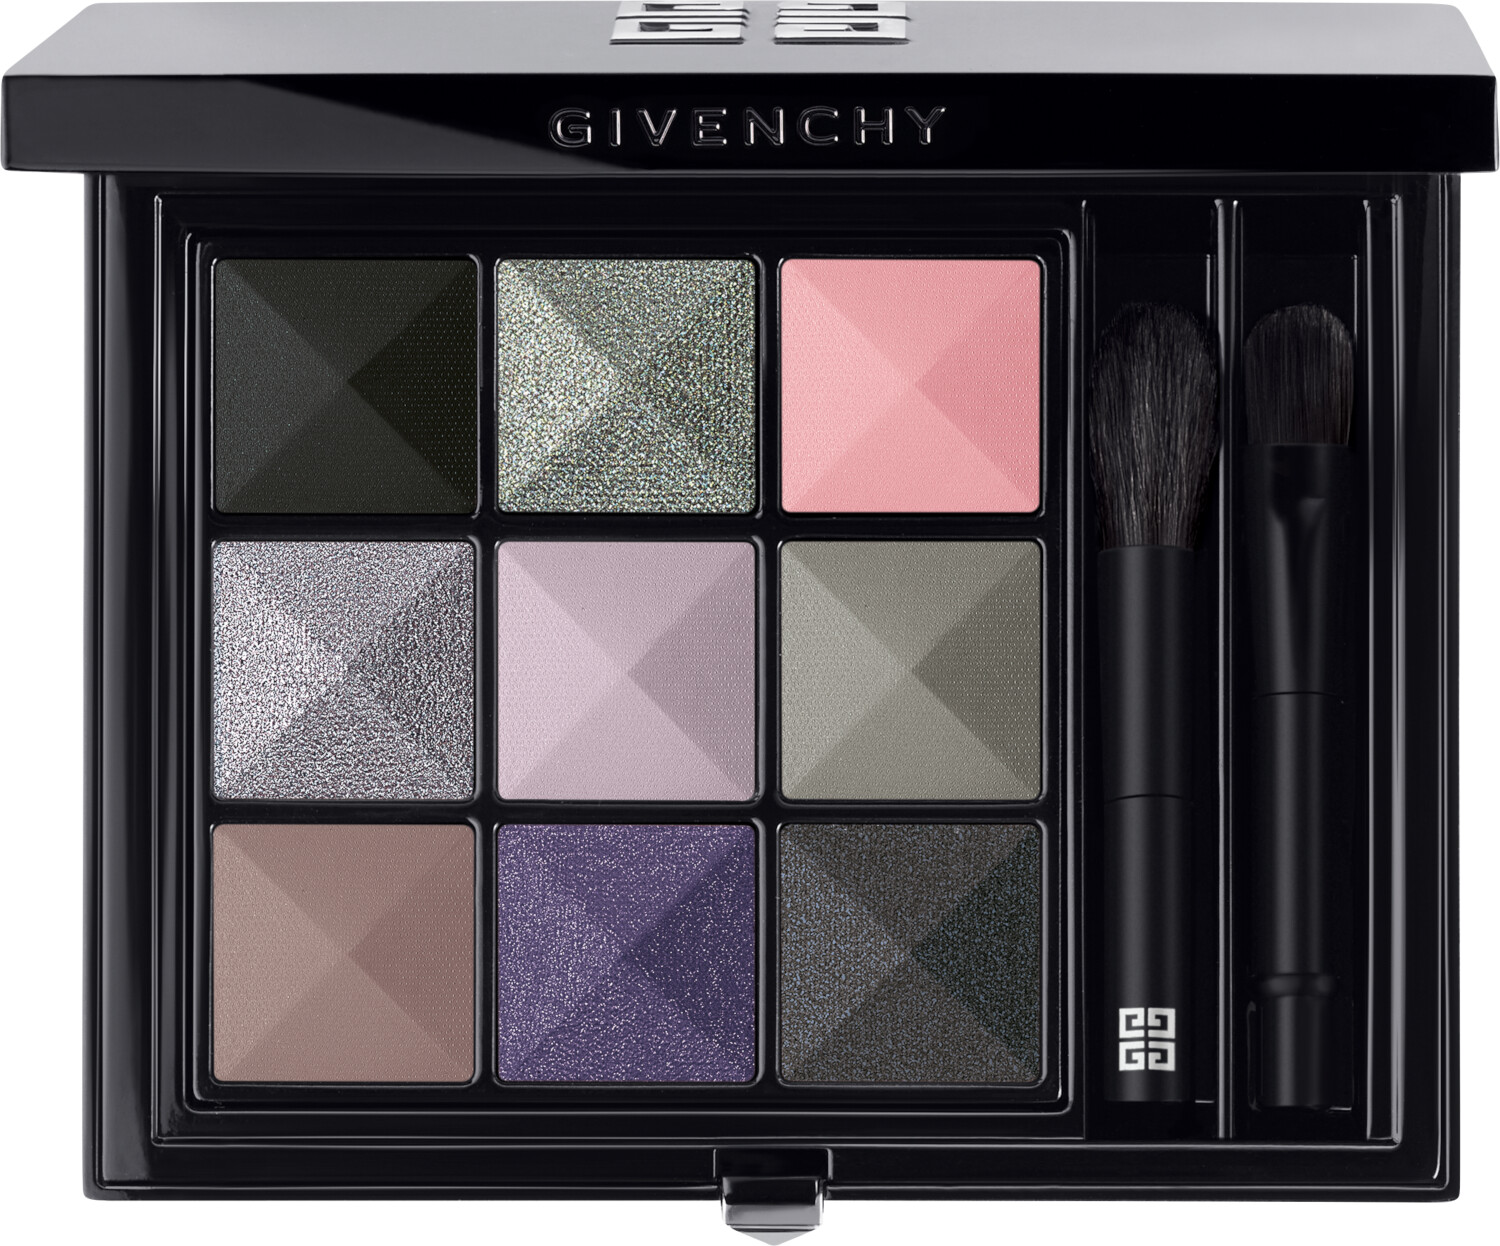 GIVENCHY Le 9 De Givenchy Eyeshadow Palette 8g Le 9.04